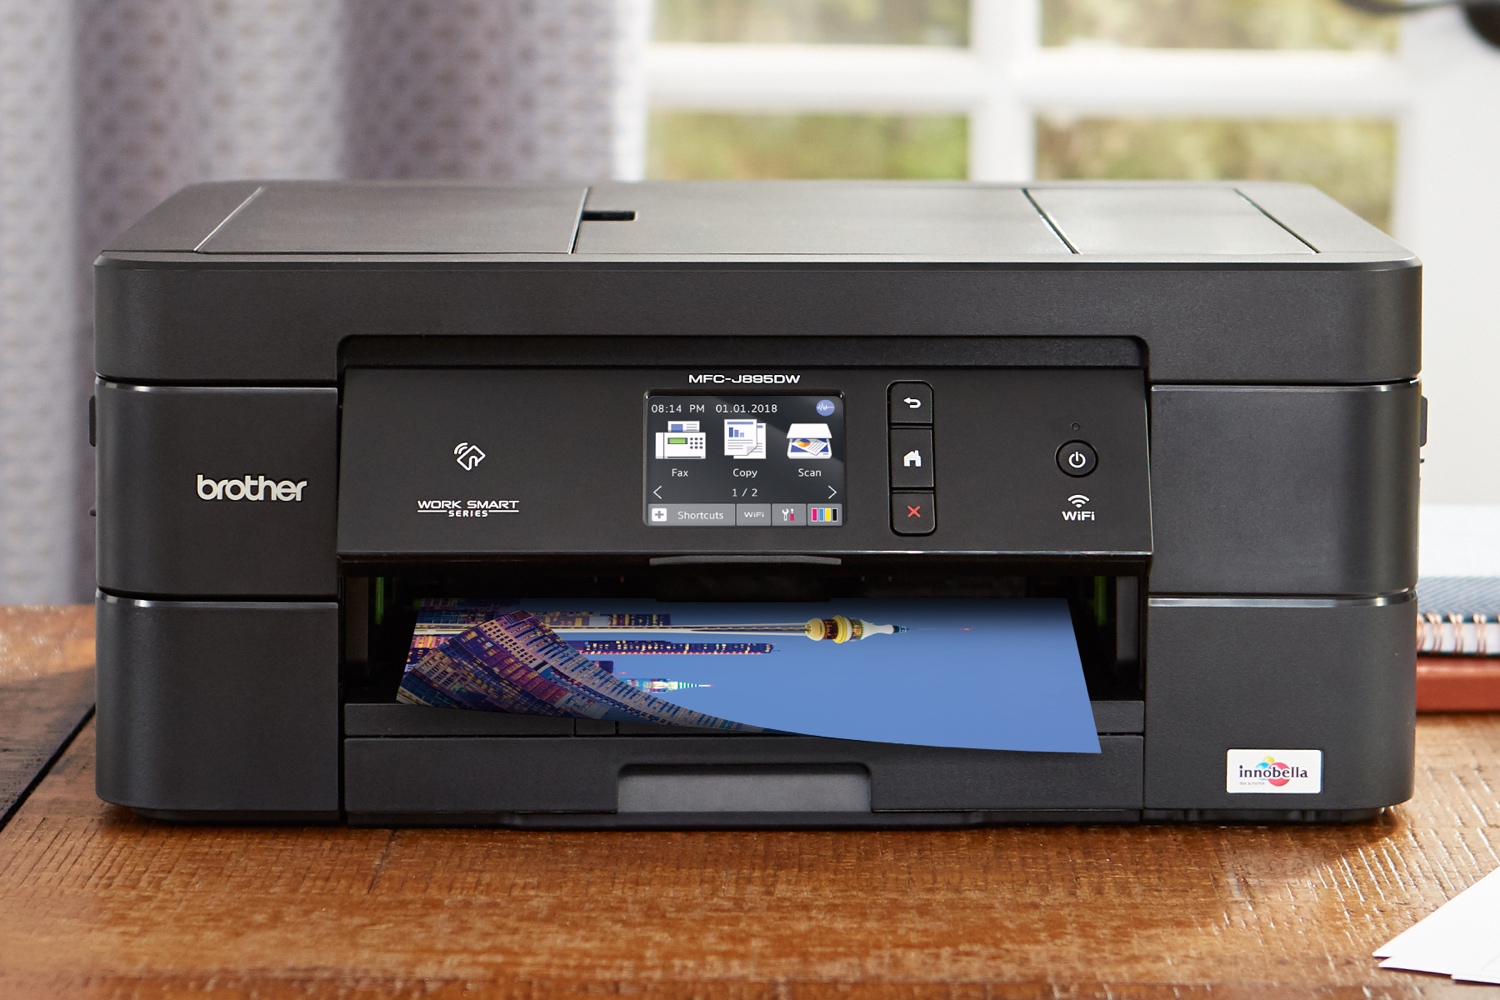 Brother Launches Work Smart Series of Connected, Compact Printers